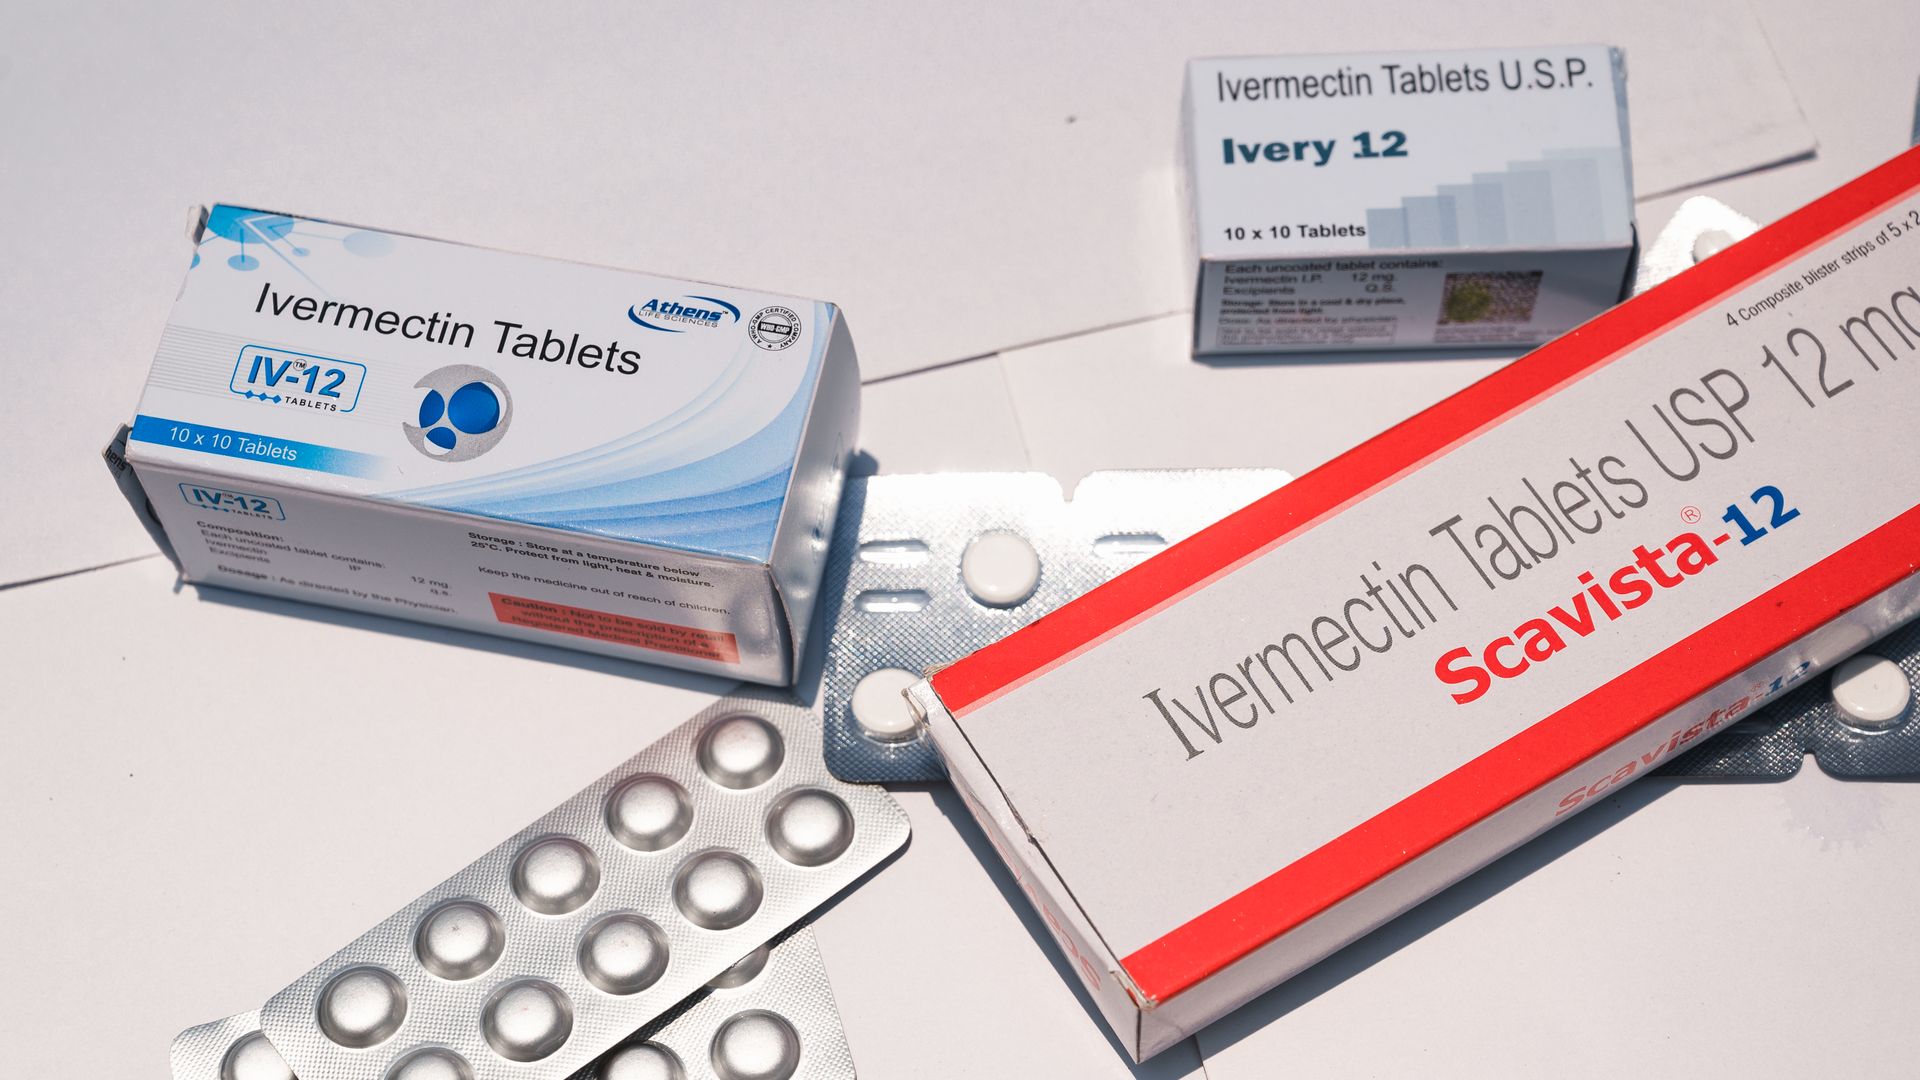 Picture of ivermectin tablet boxes